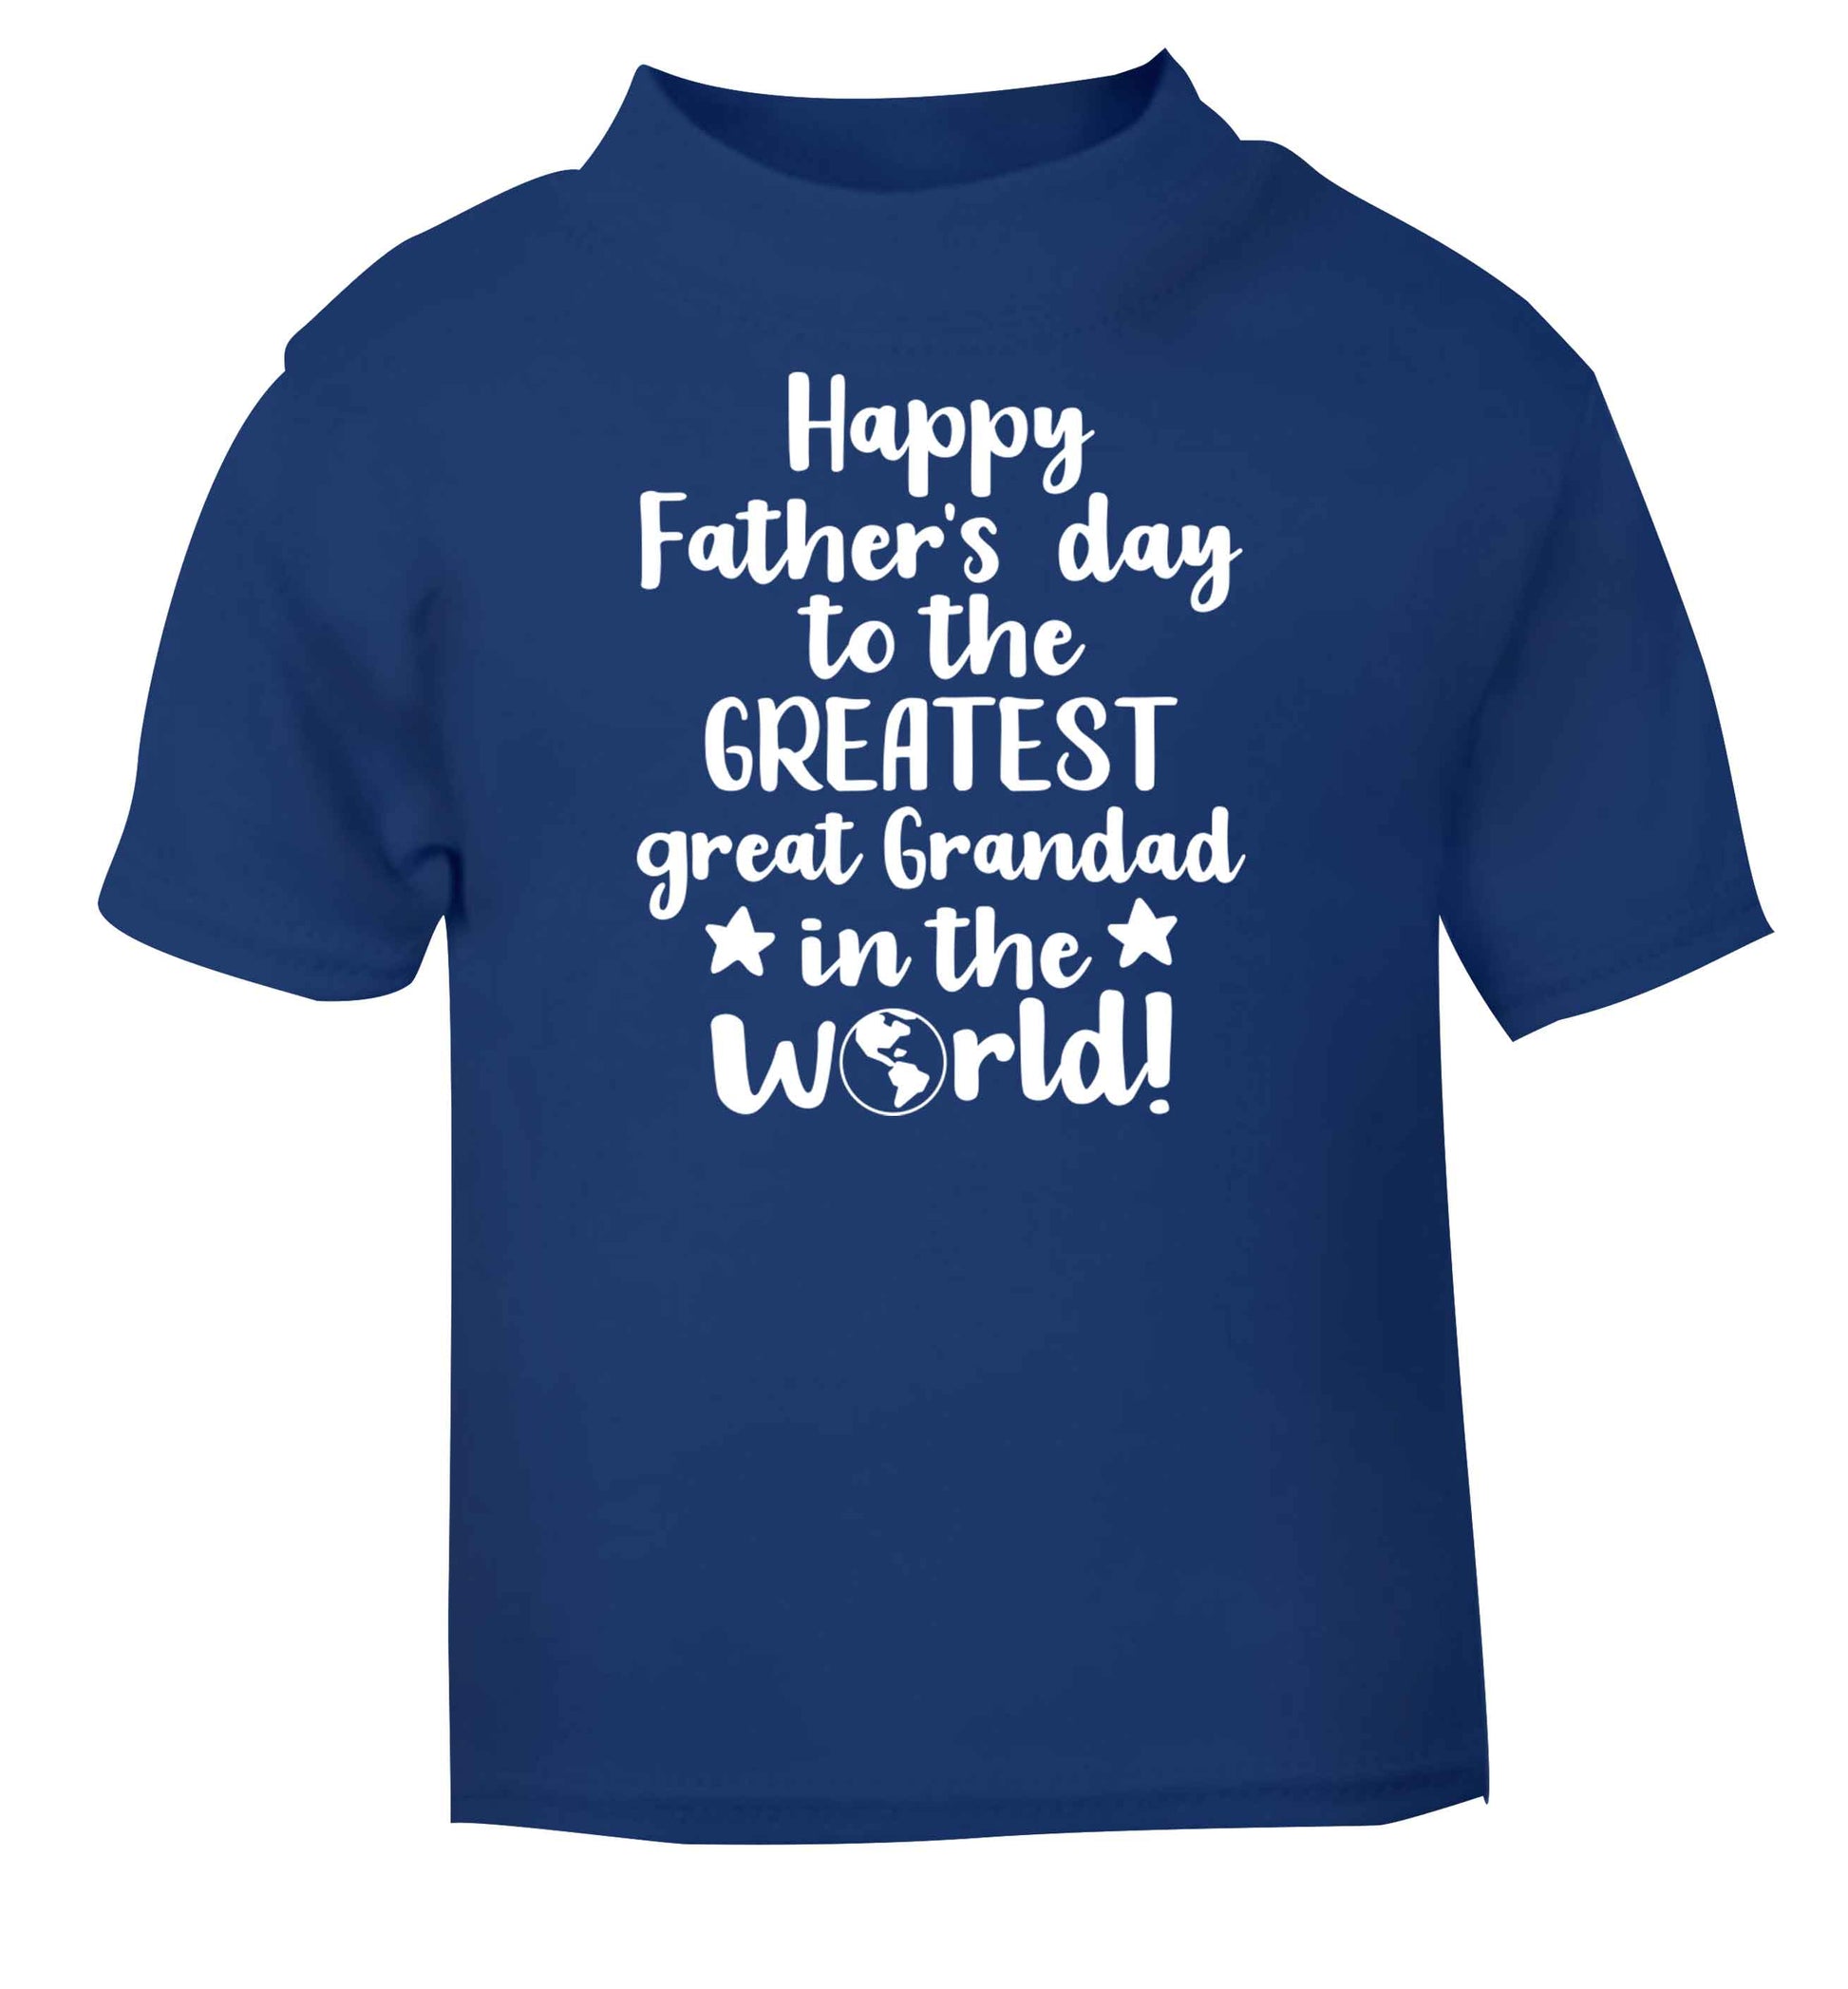 Happy Father's day to the greatest great grandad in the world blue baby toddler Tshirt 2 Years